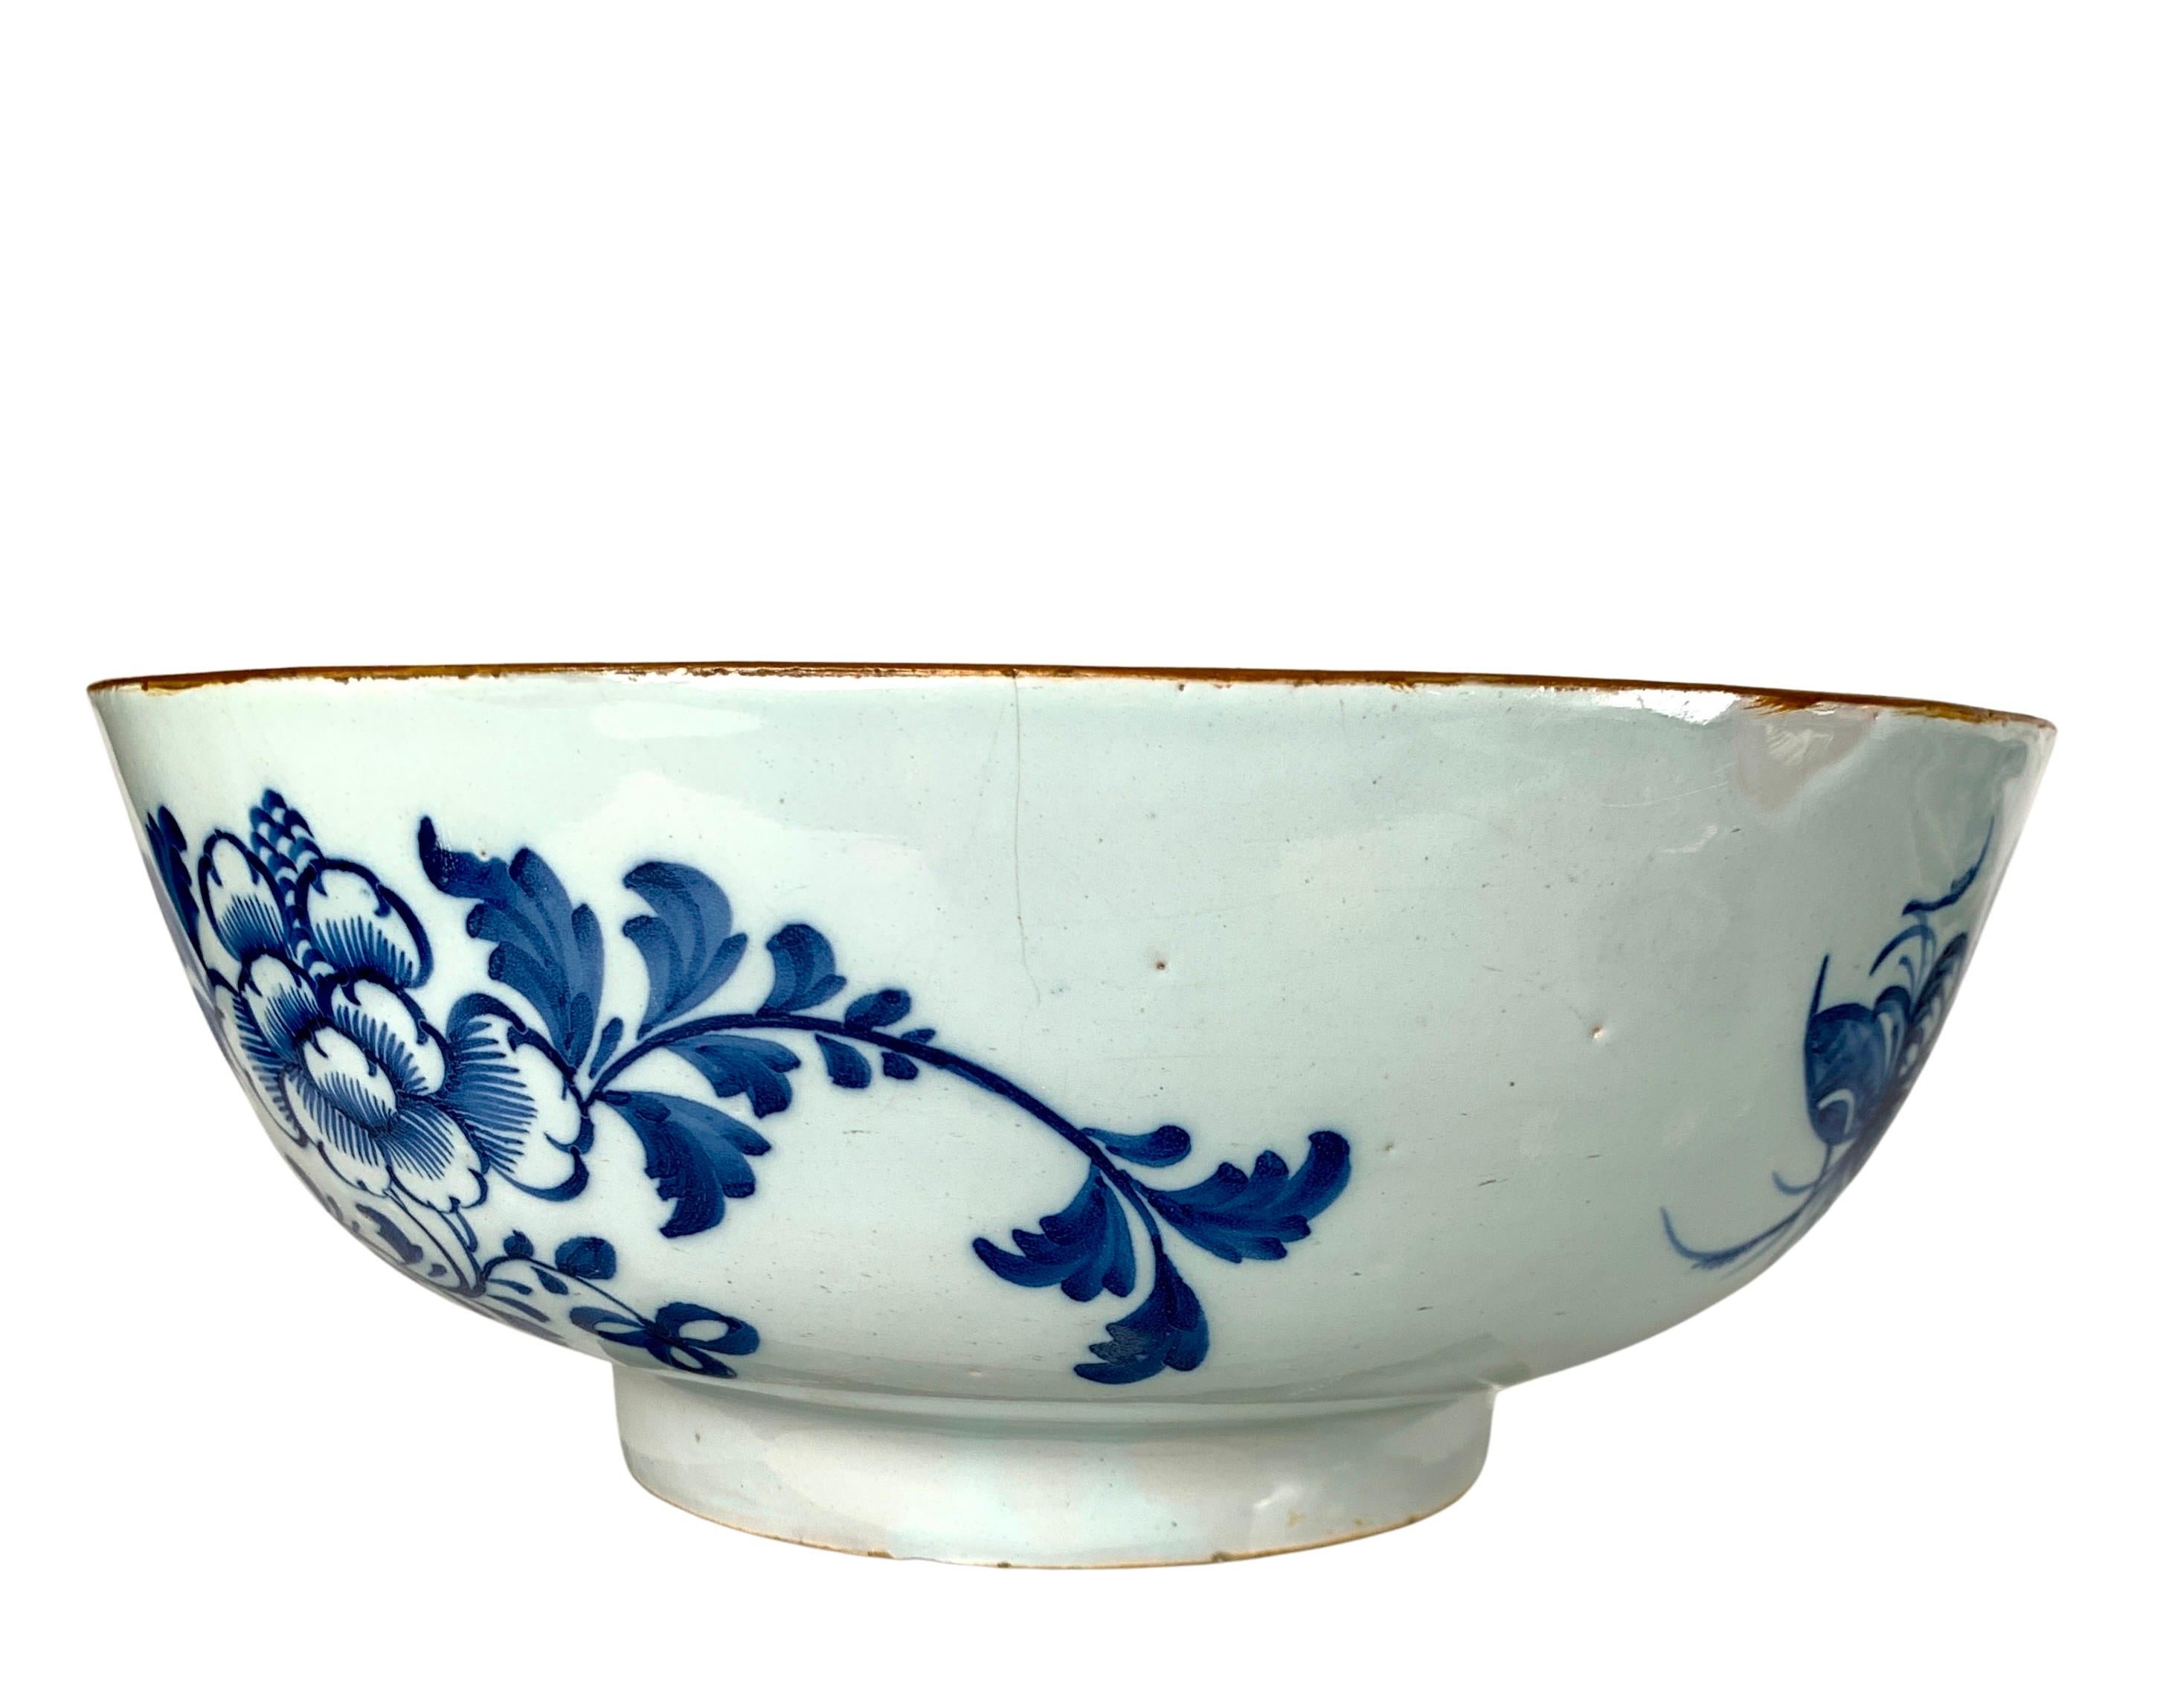 Blue and White Delft Punch Bowl Hand Painted Mid 18th Century Netherlands In Fair Condition For Sale In Katonah, NY